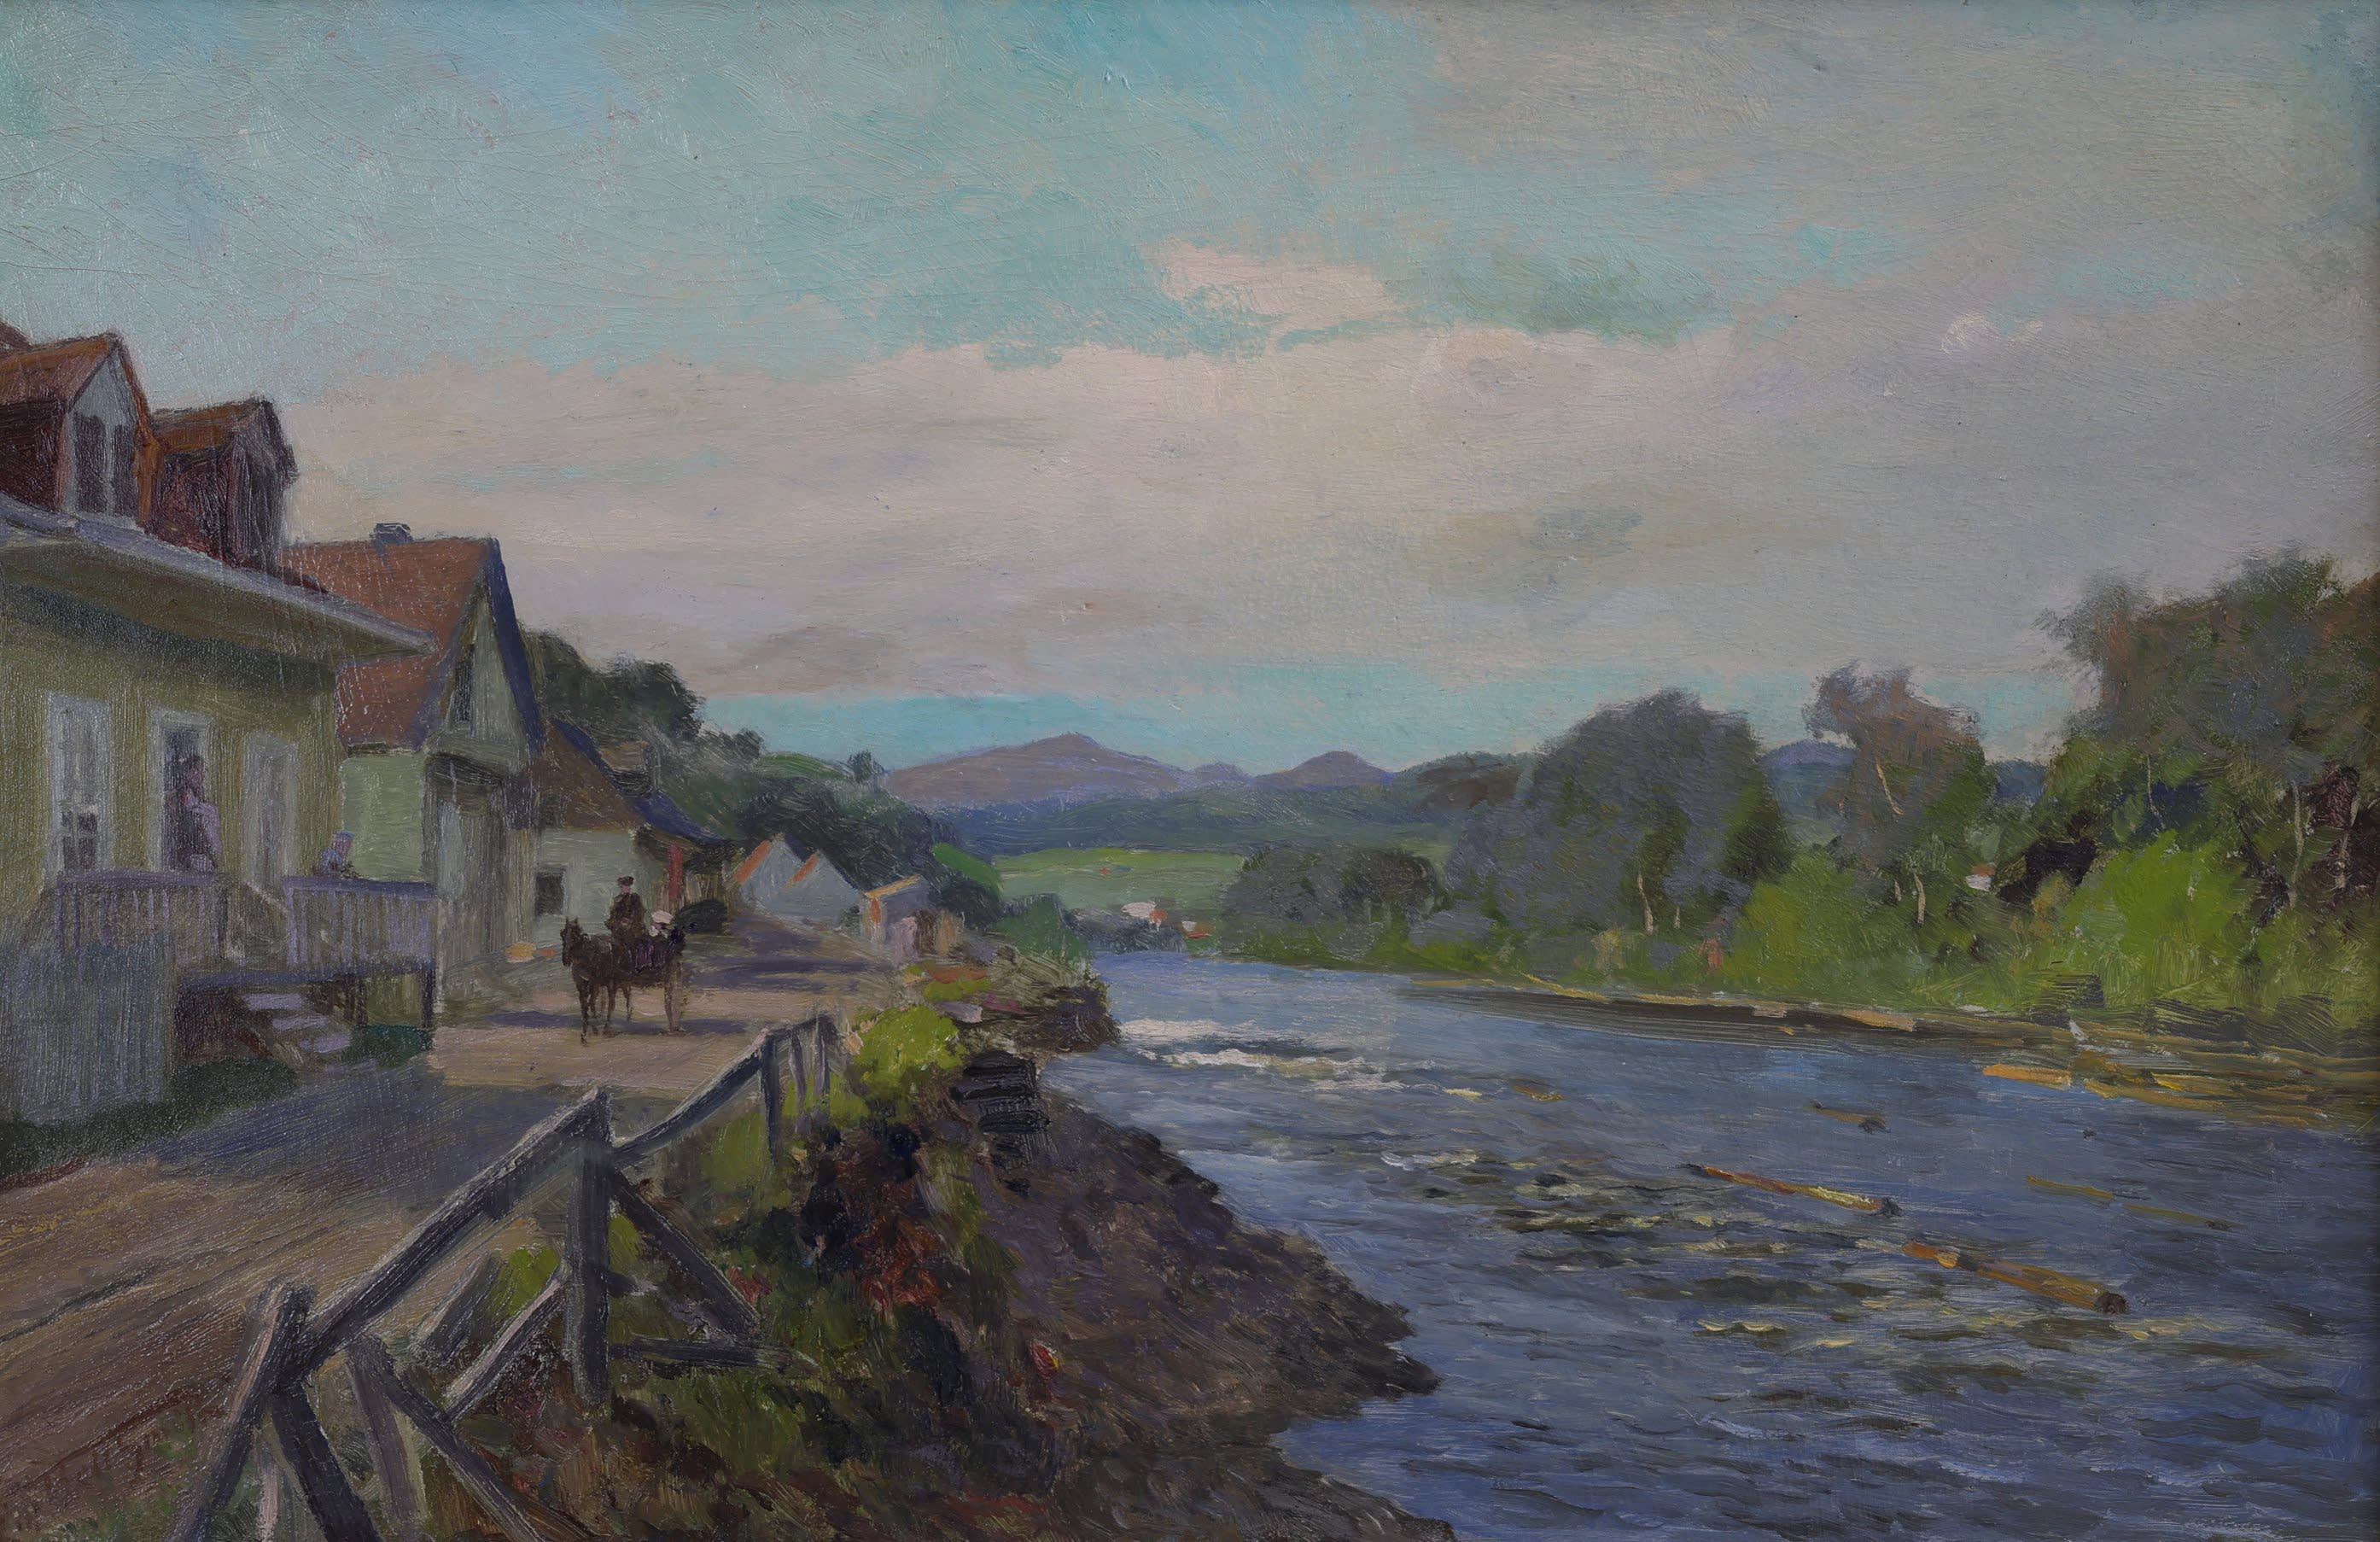 Frederic Marlett Bell-Smith; Town By the River